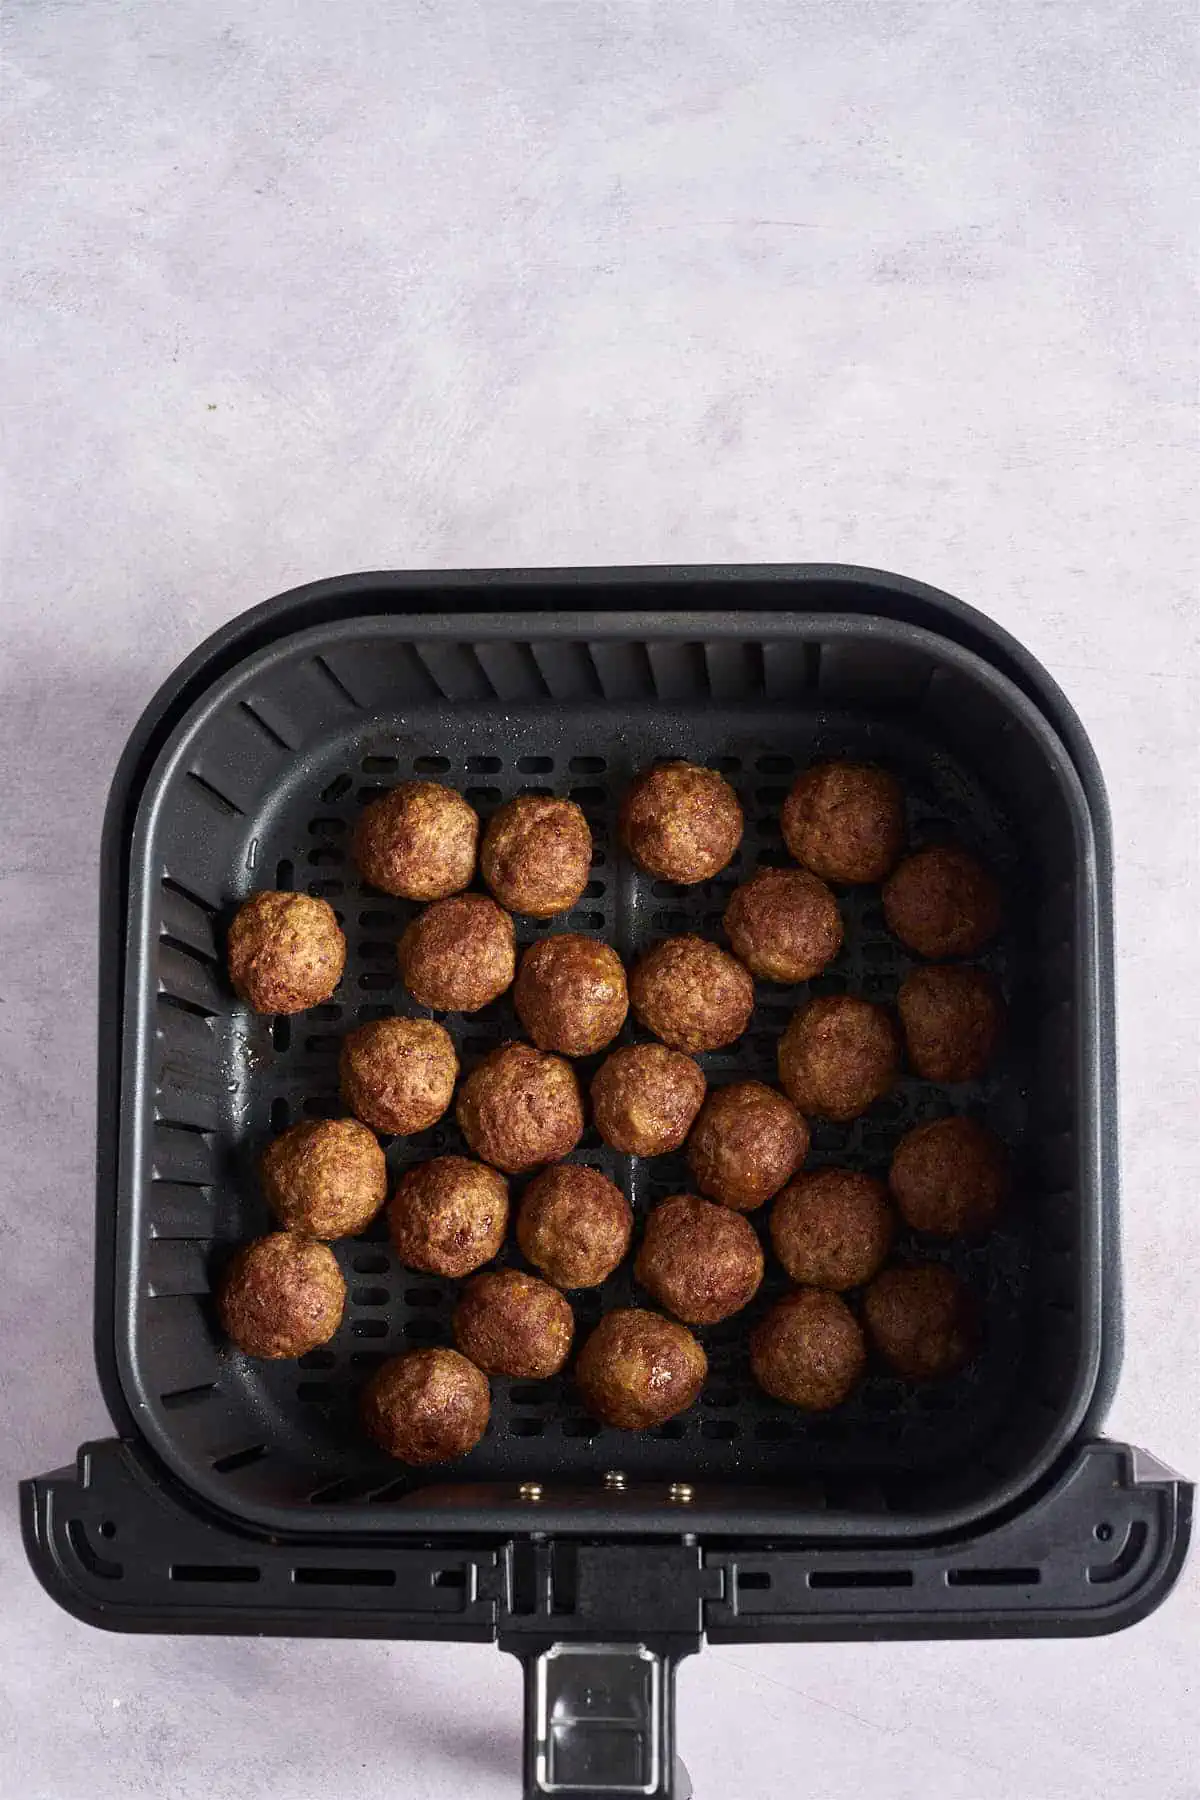 The meatballs in the air fryer basket after cooking.